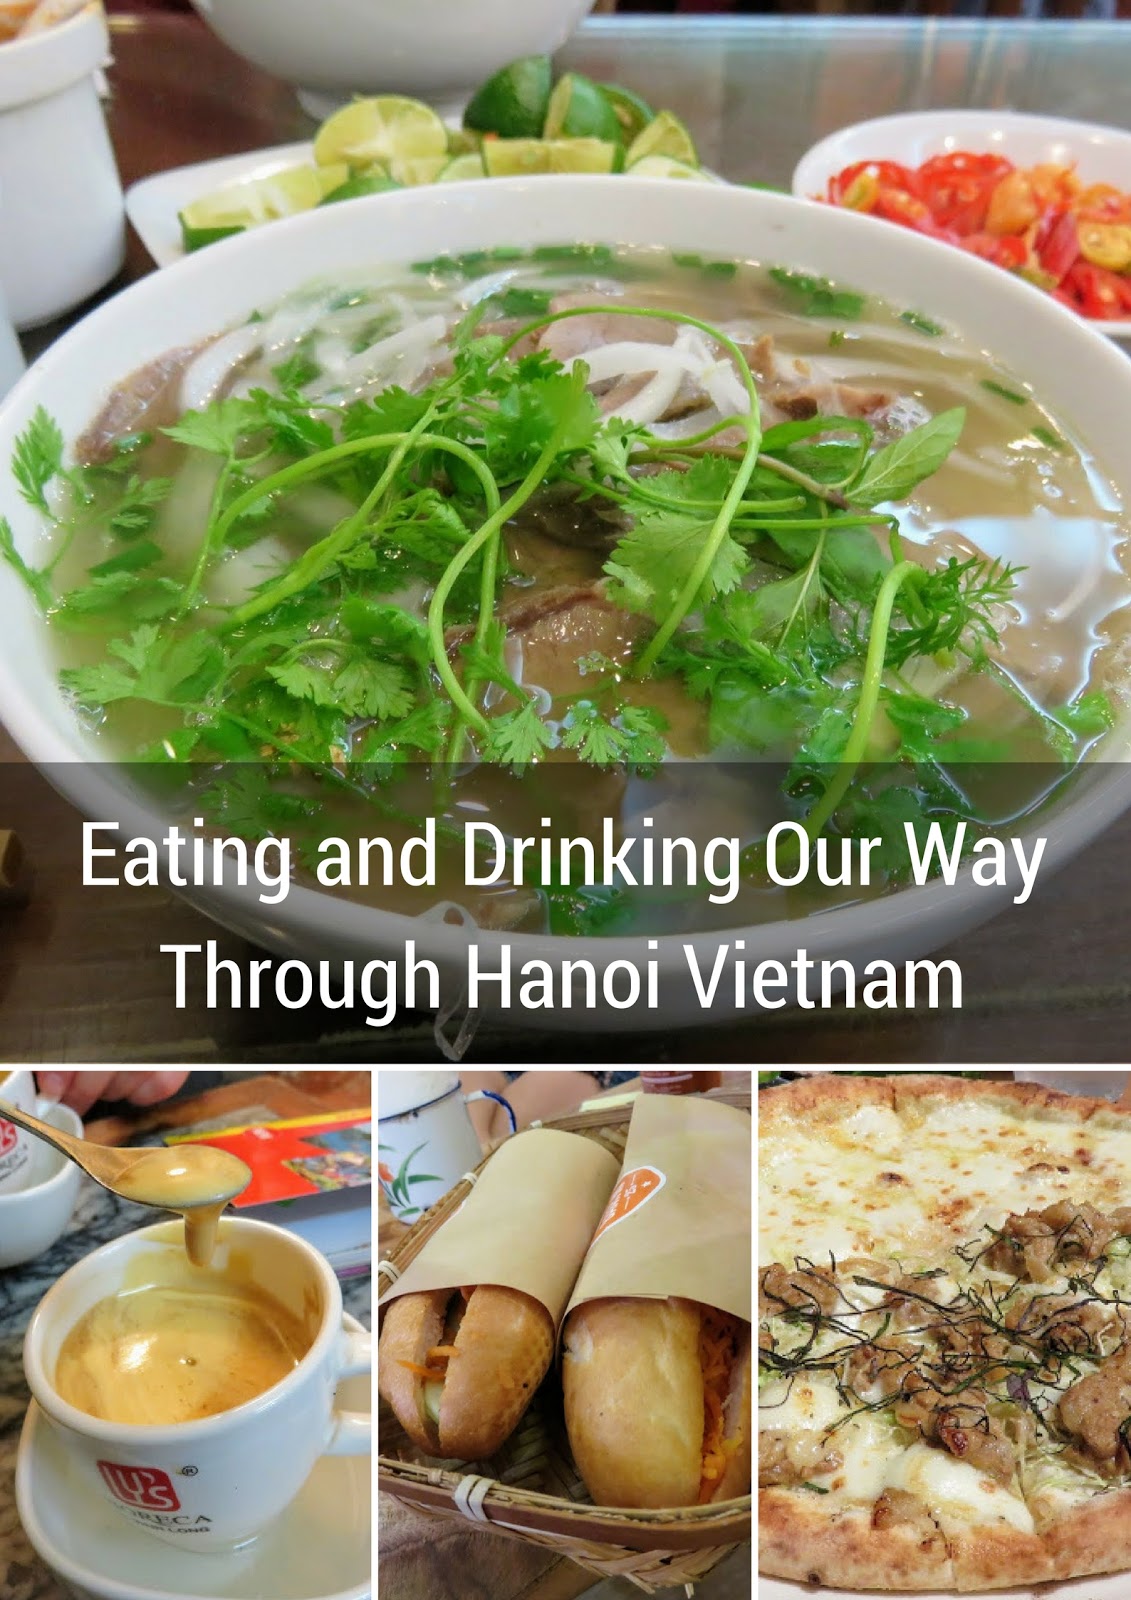 Eating and Drinking Our Way Through Hanoi Vietnam